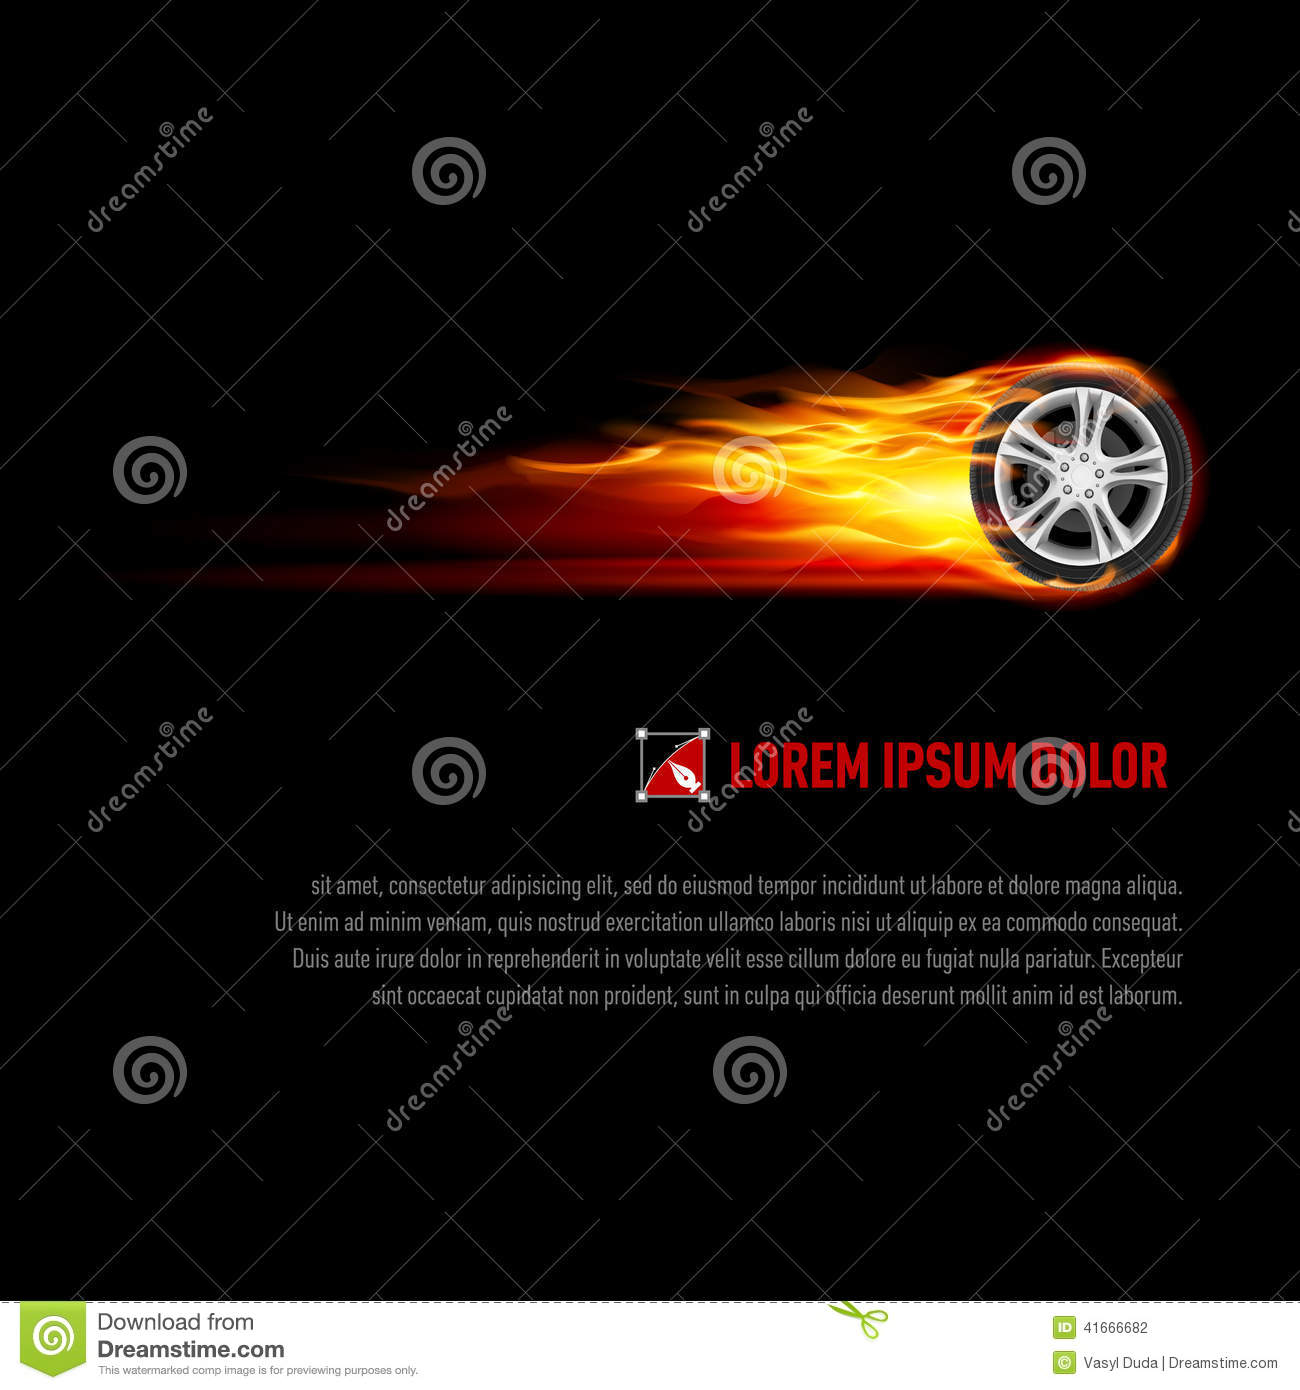 Background With Wheel In Orange Flame For Your Design